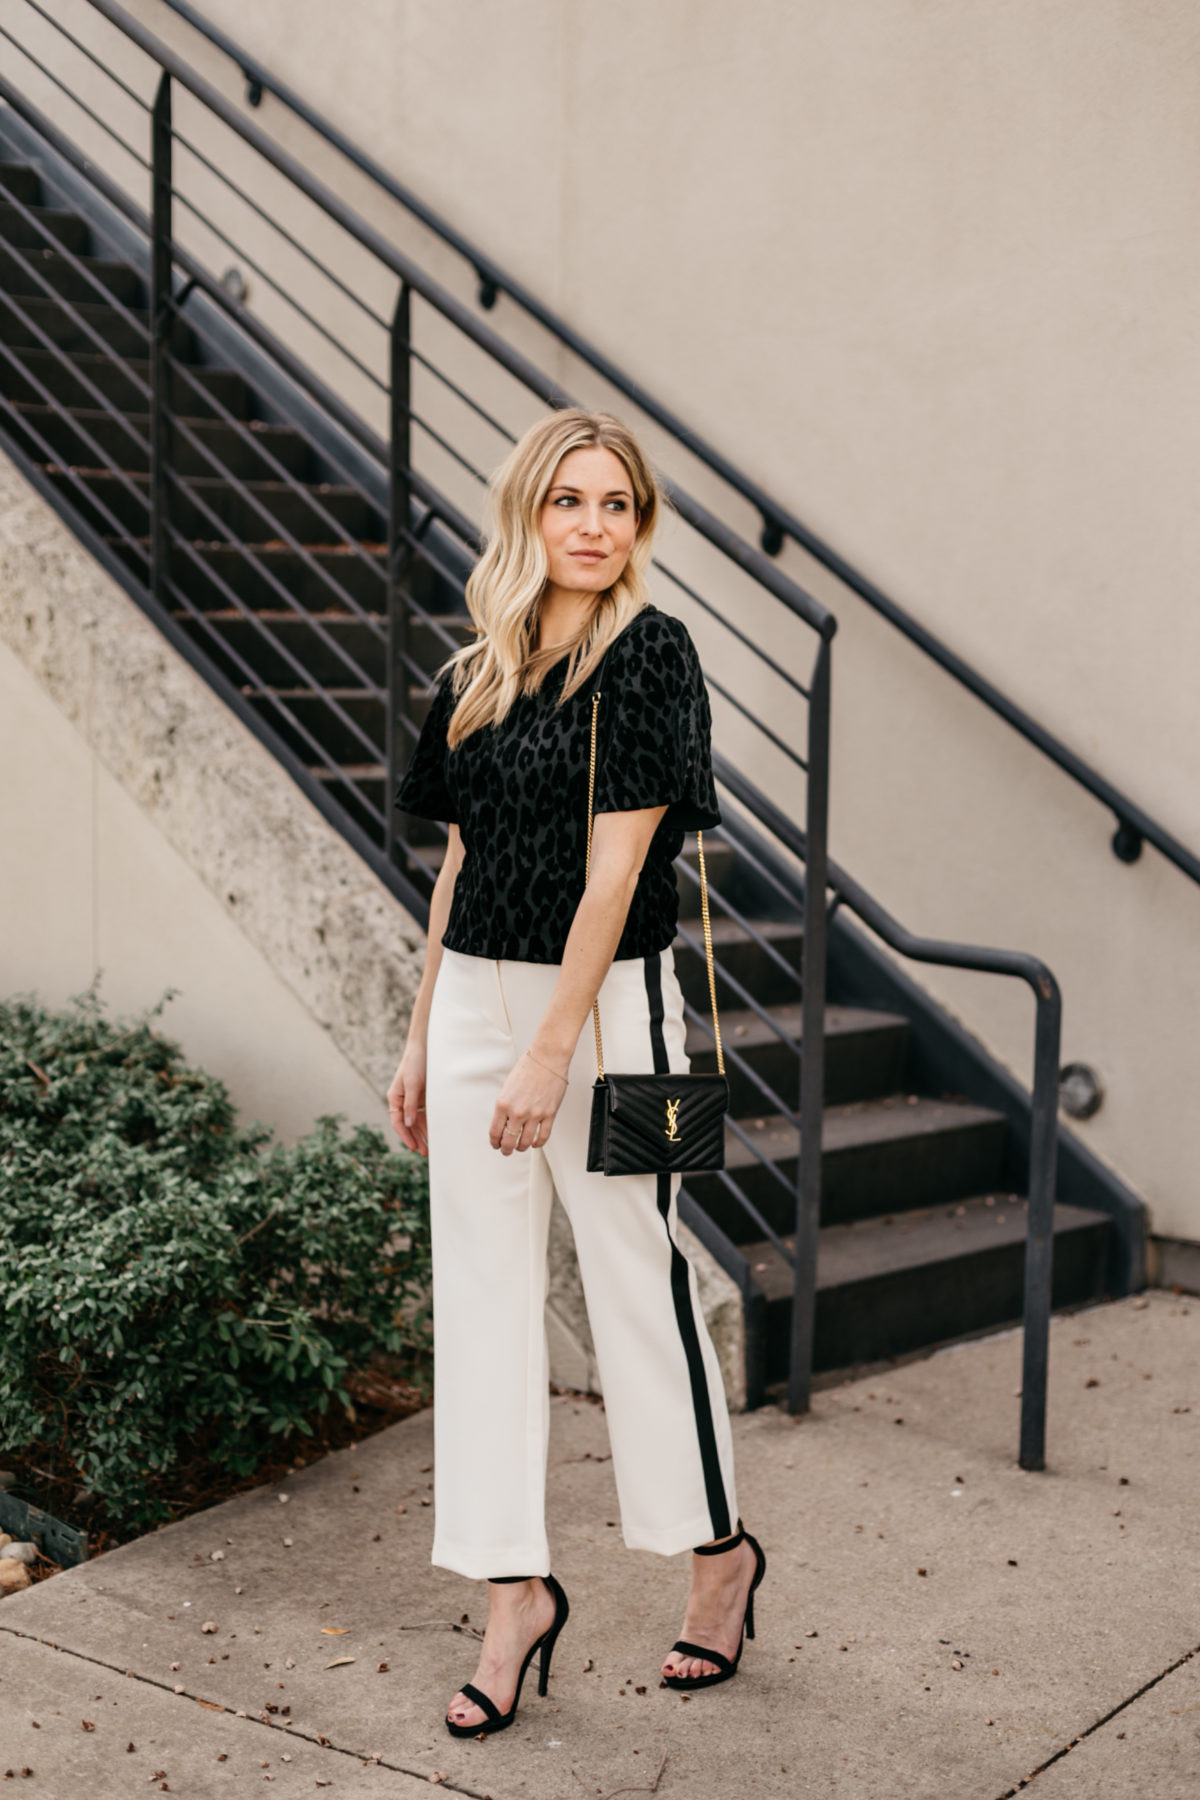 OUTFIT 3 Details:  White Wide Leg Stripe Pants // Black Short Sleeve Blouse // Black and Gold Crossbody Clutch // Black Strappy Heels